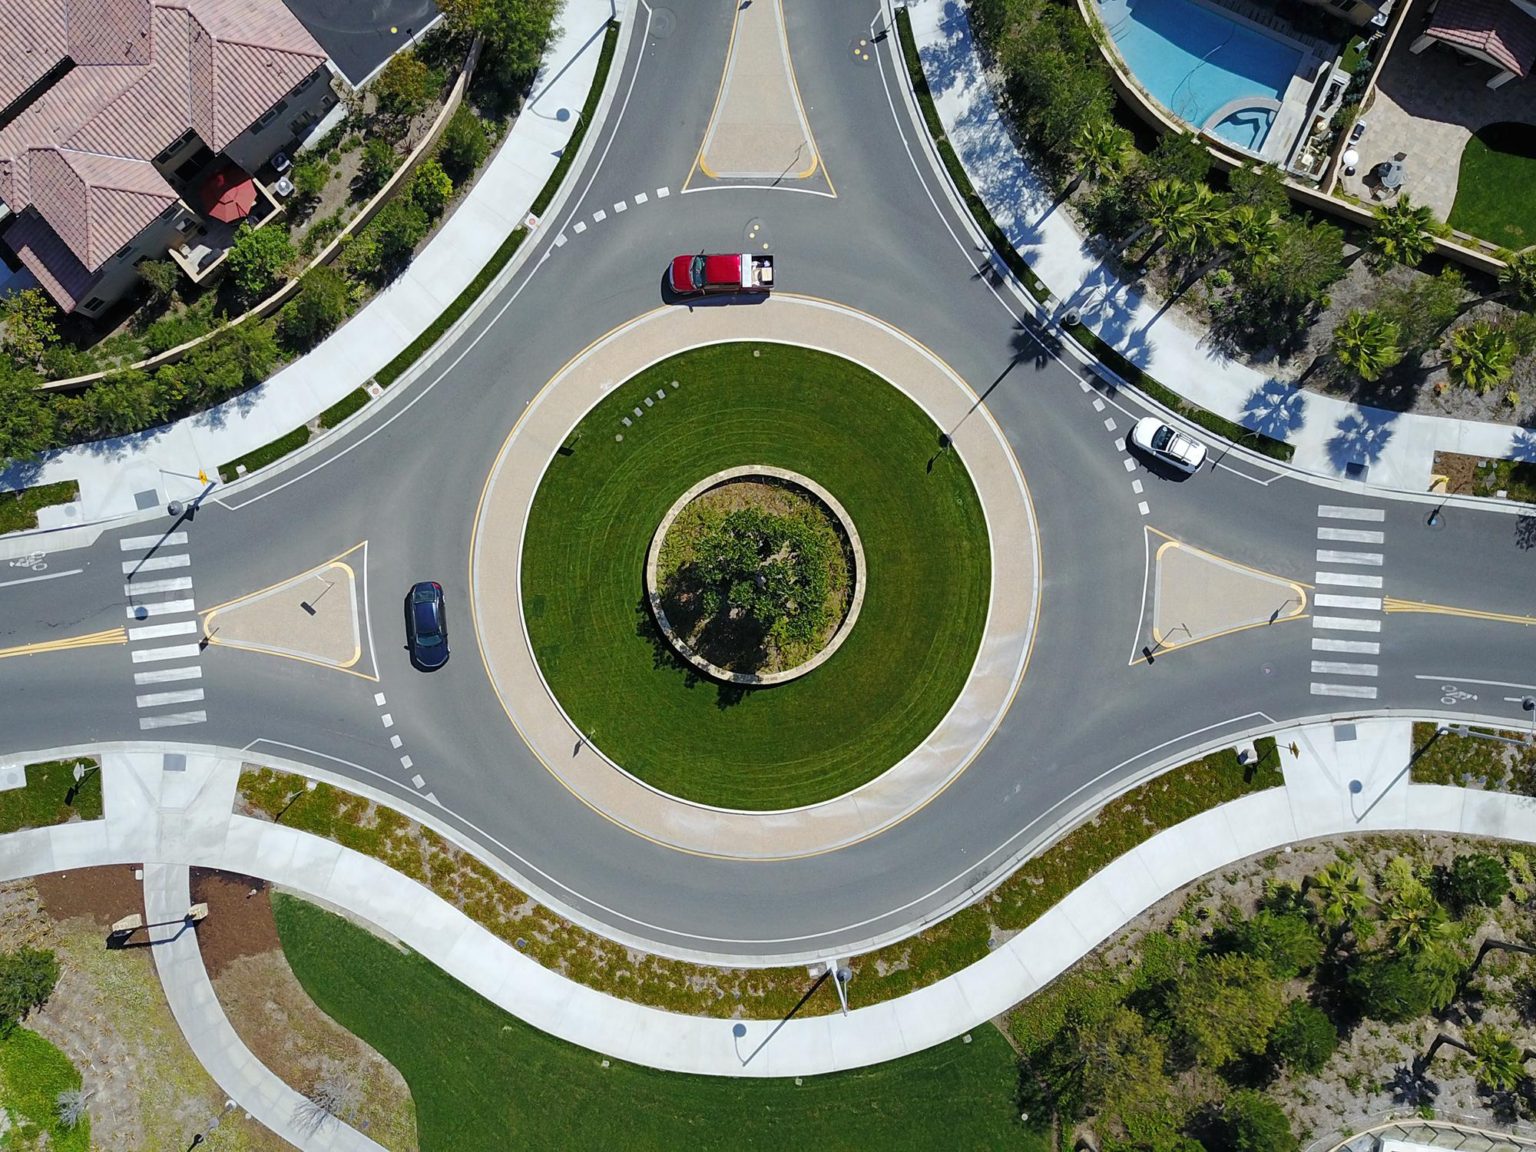 Roundabouts are safer than traffic lights according to the Insurance Institute for Highway Safety.